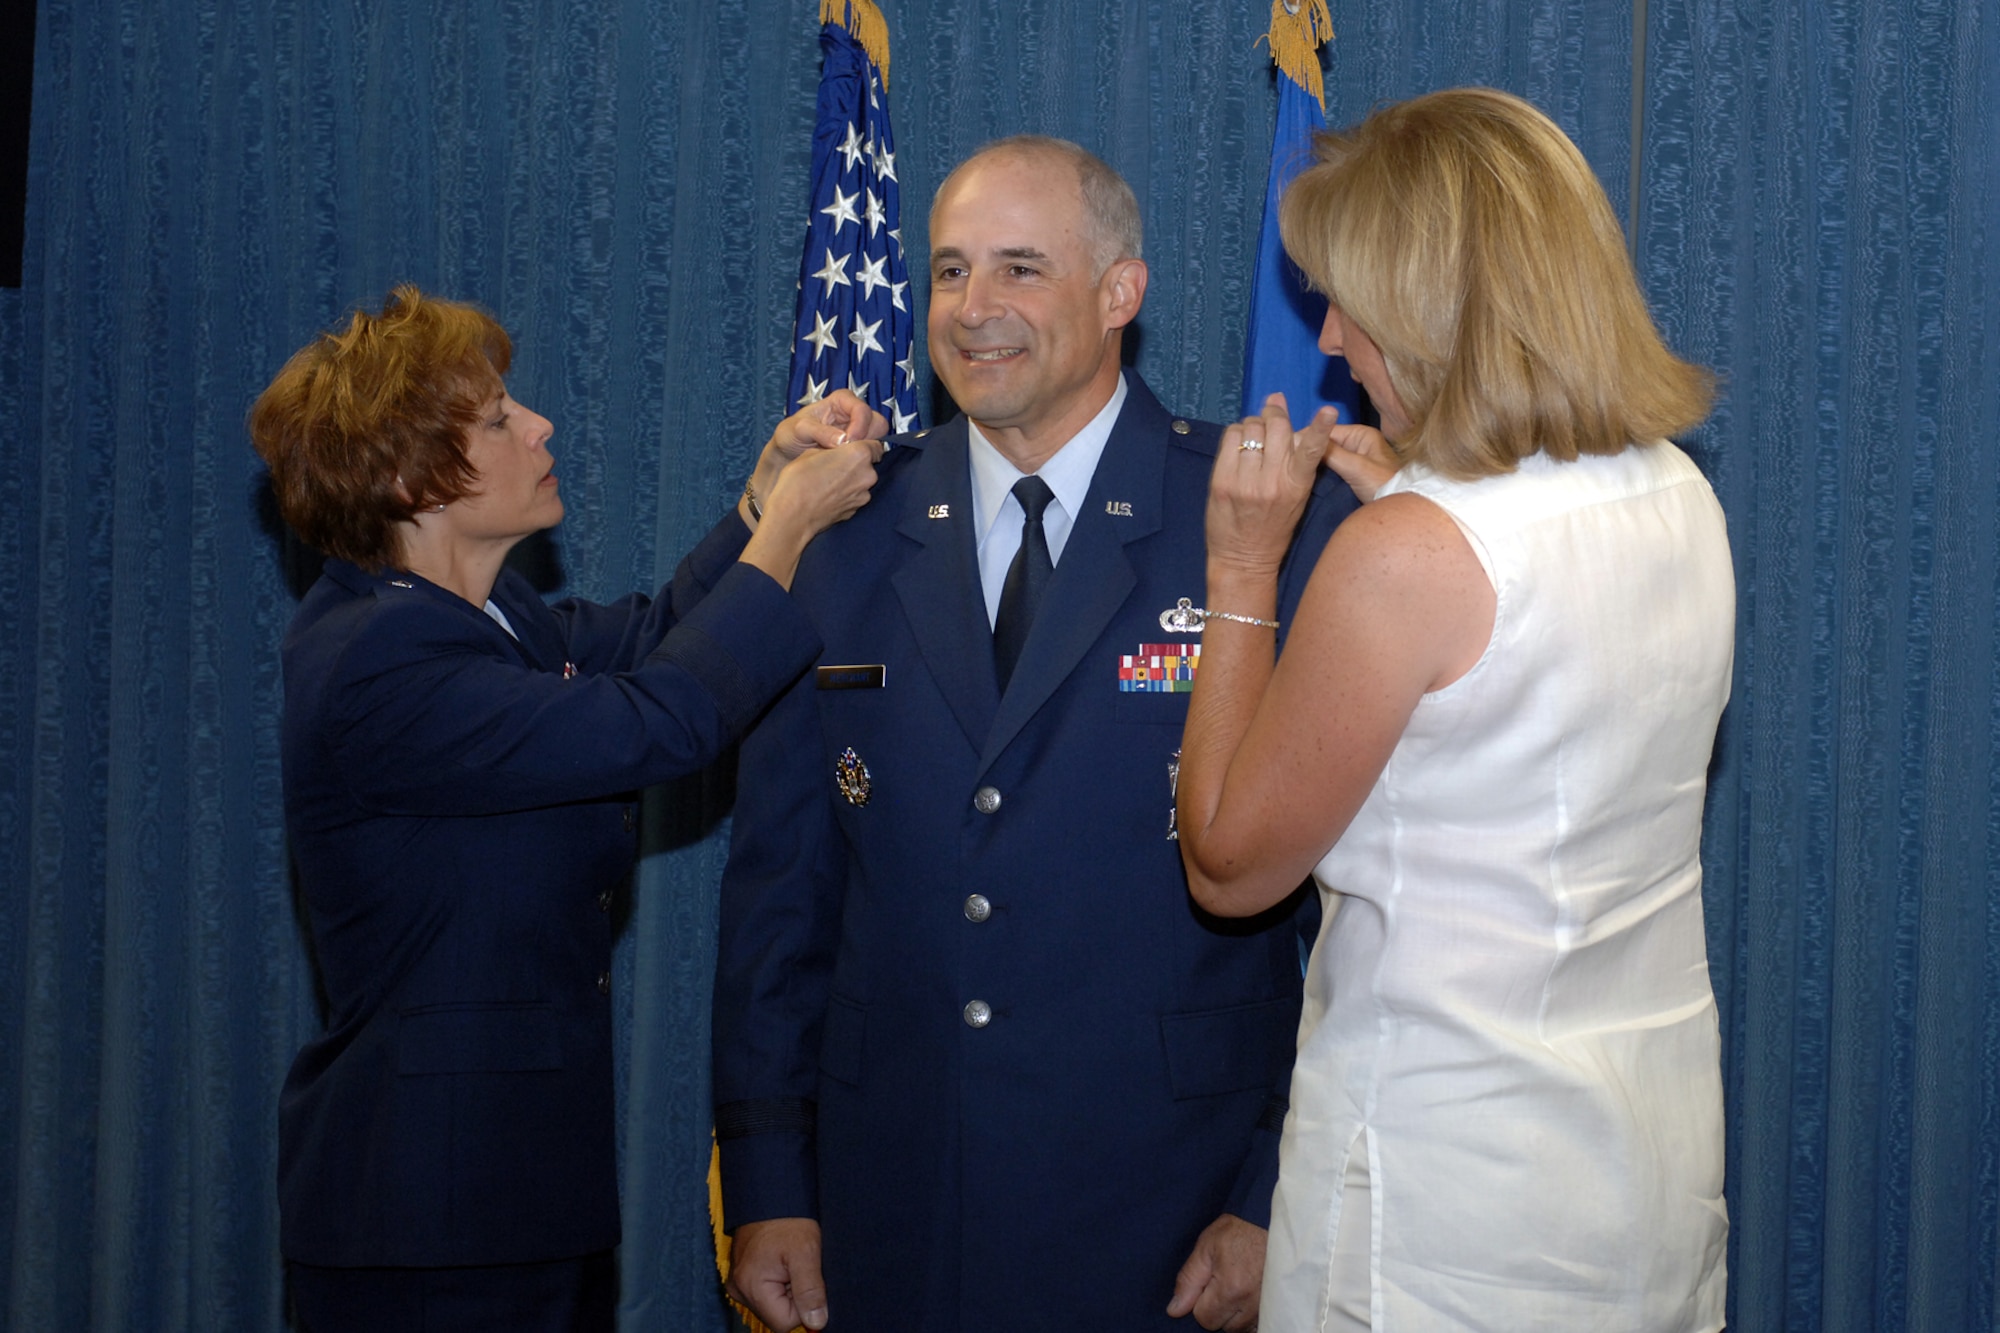 HILL AIR FORCE BASE, Utah--Colonel Kenneth Merchant, vice commander for the Ogden Air Logistics Center, gets his brigadier general star pinned on by Brigadier General Kathleen Close, Ogden ALC commander, and his wife Sue during a promotion ceremony held in his honor July 3. (U.S. Air Force photo by Alex R. Lloyd)